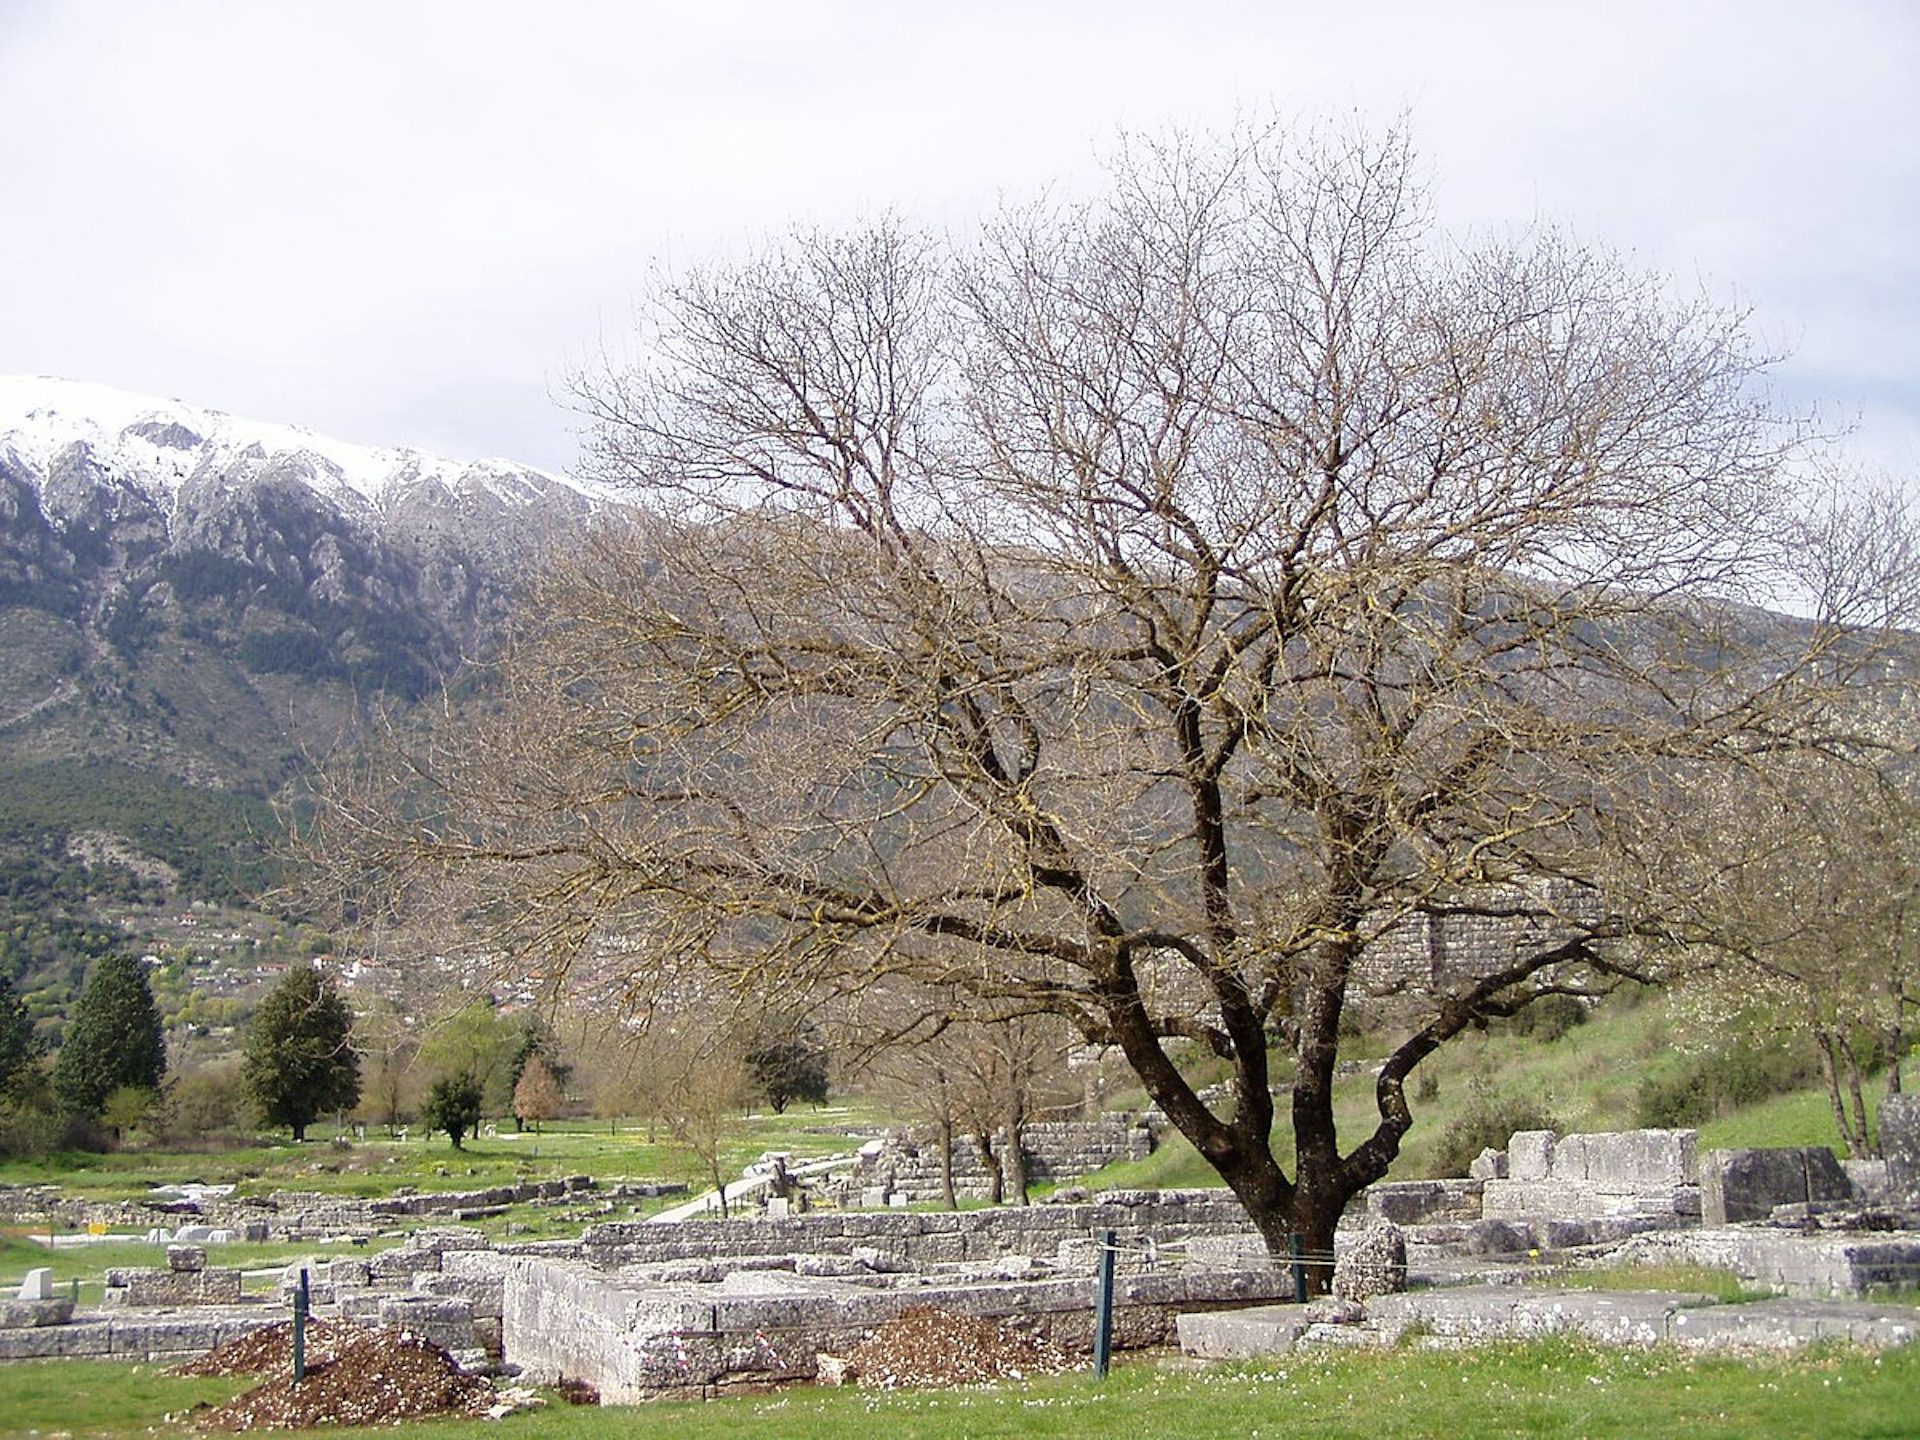 Ruins of the Temple of Zeus at Dodona